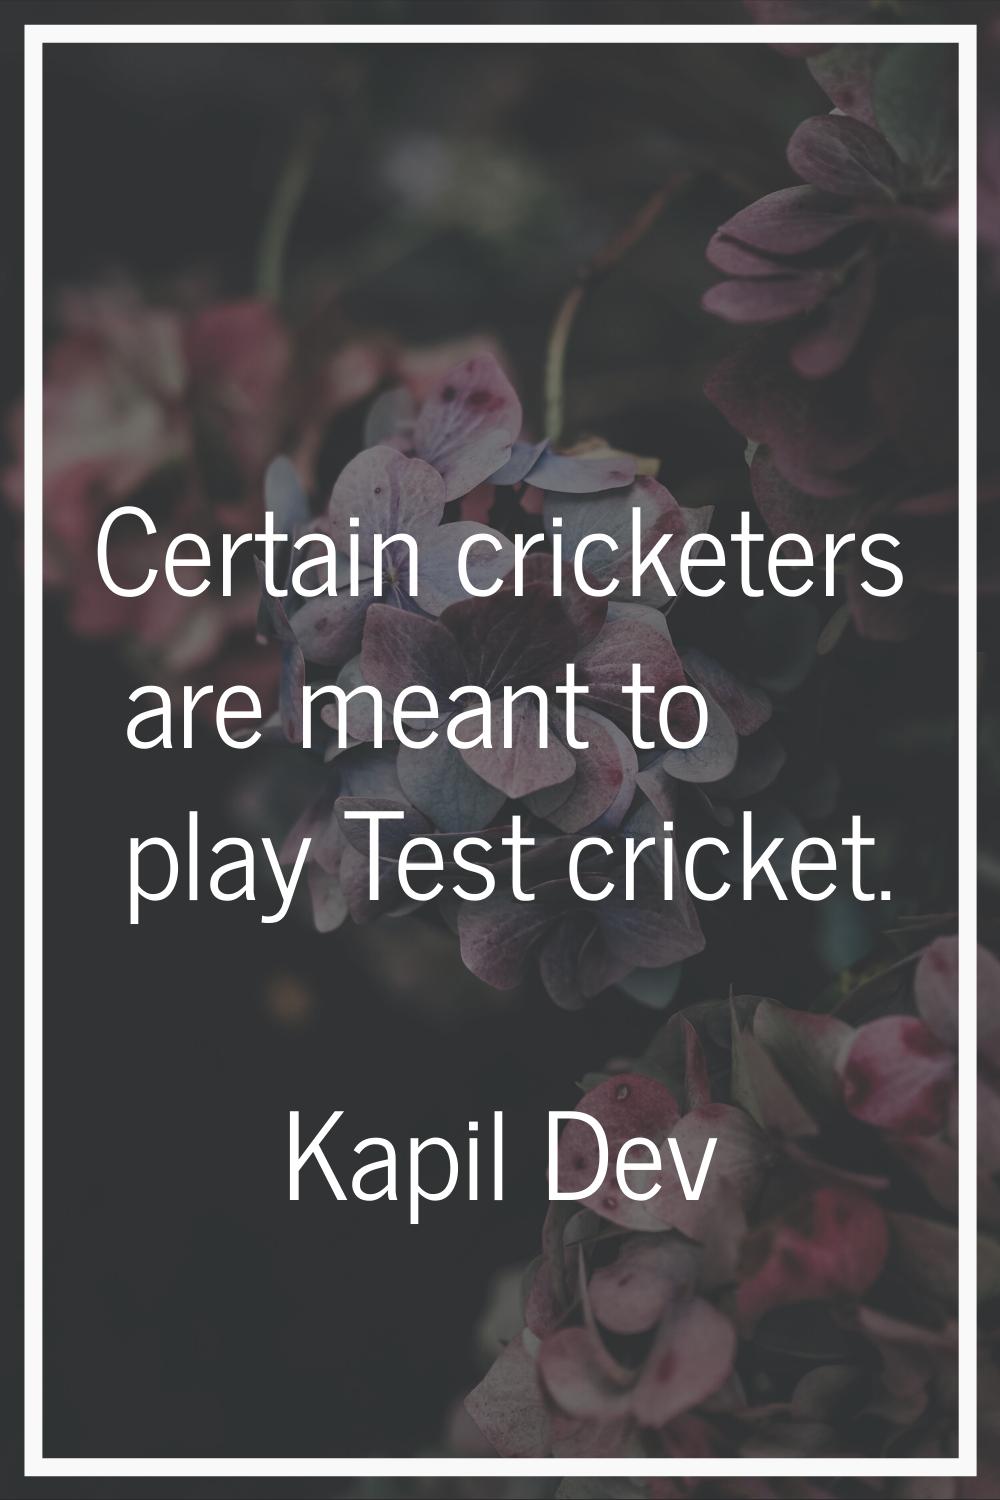 Certain cricketers are meant to play Test cricket.